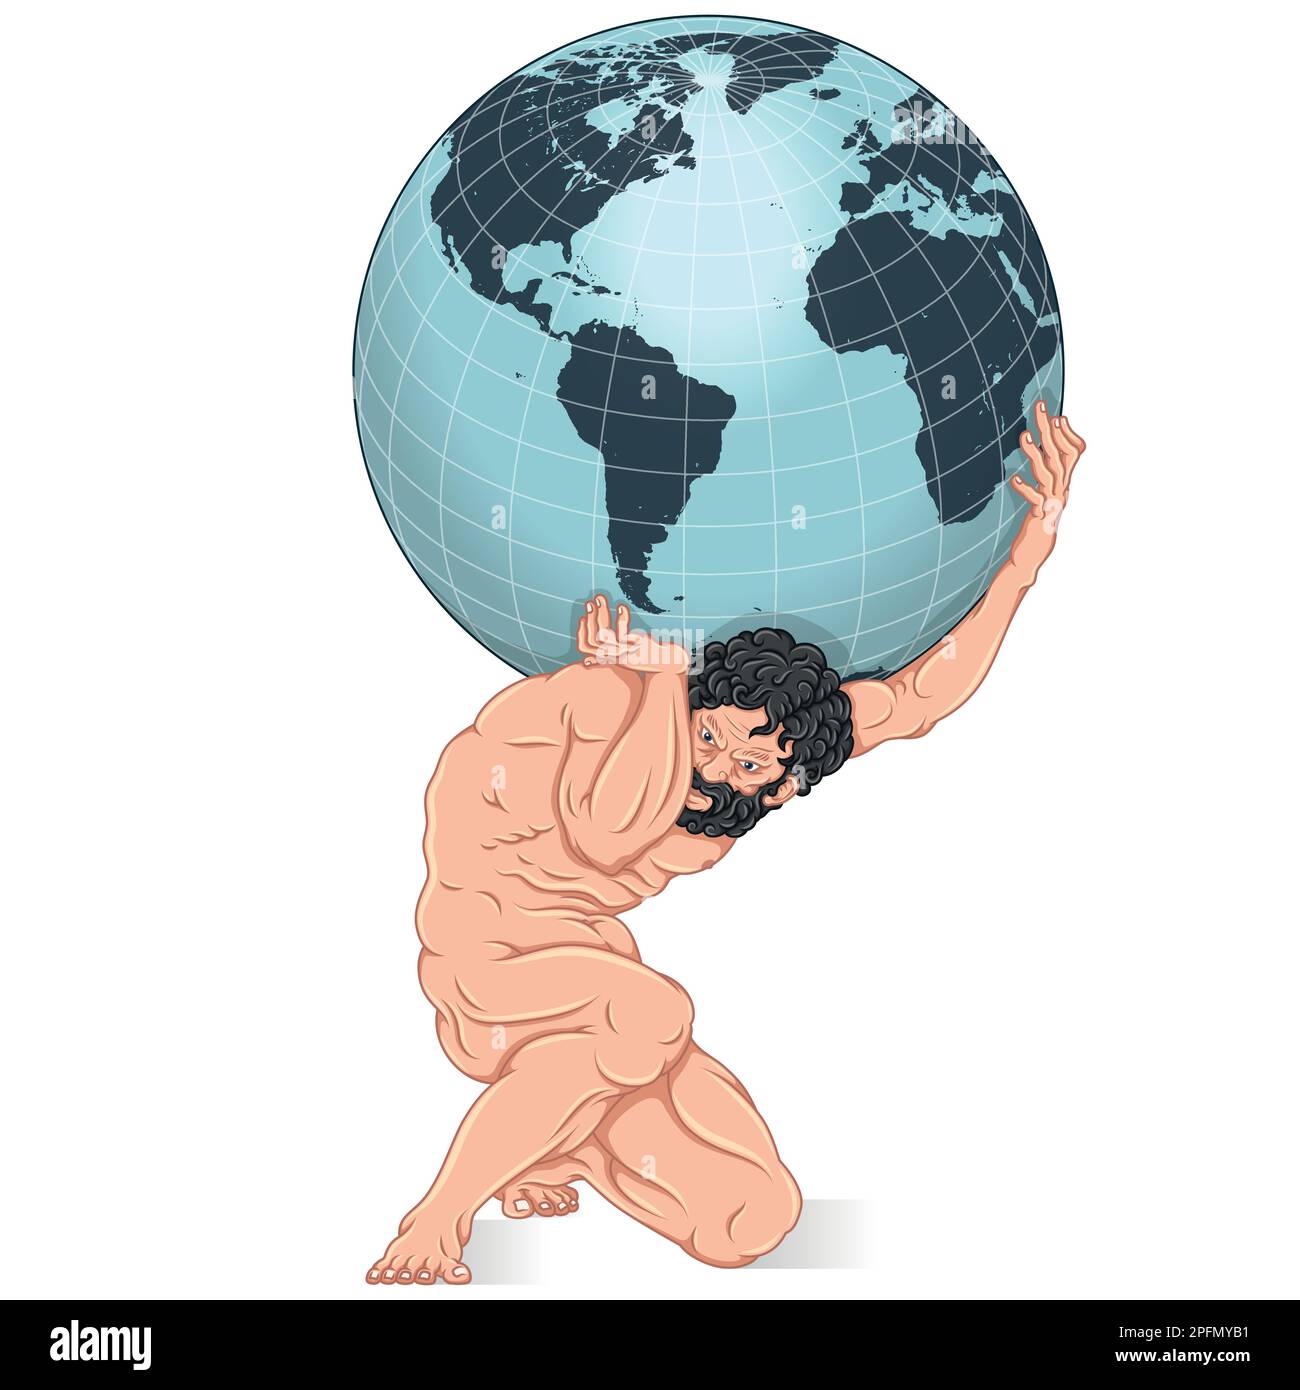 Vector design of the titan Atlas holding the planet earth on his shoulders, titan from Greek mythology holding the earth sphere. Stock Vector